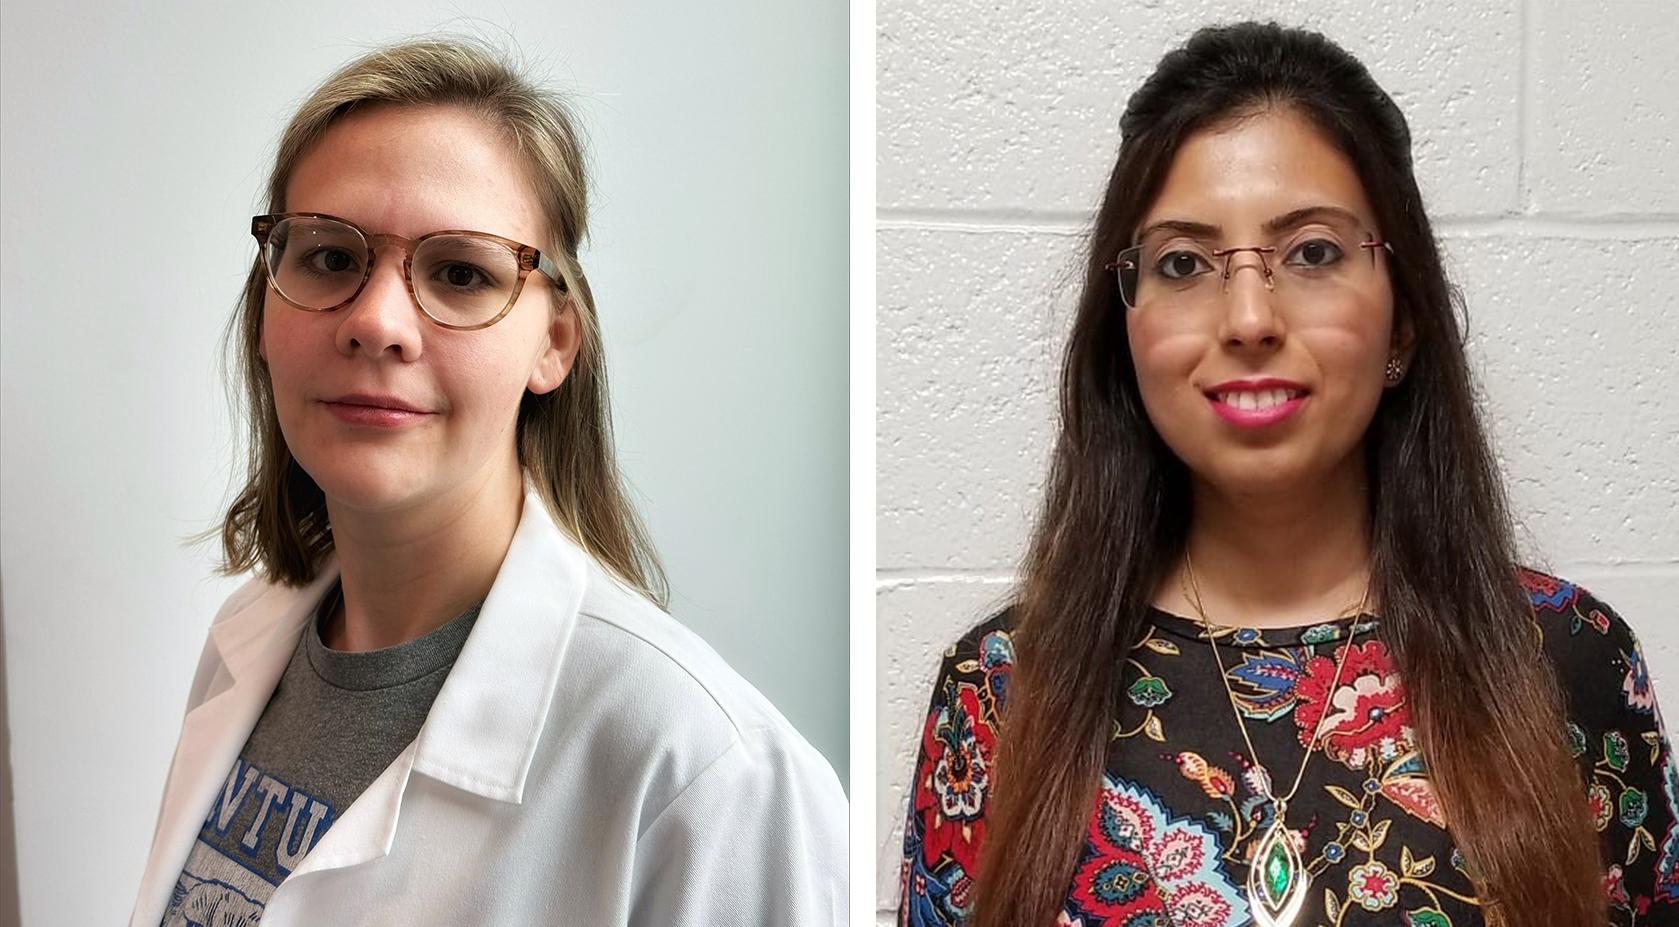 Meagan Kingren, PhD and Sujata Mukherjee, PhD, worked on their scientific research at Department of Surgery research labs. They successfully defended their dissertations in April 2023